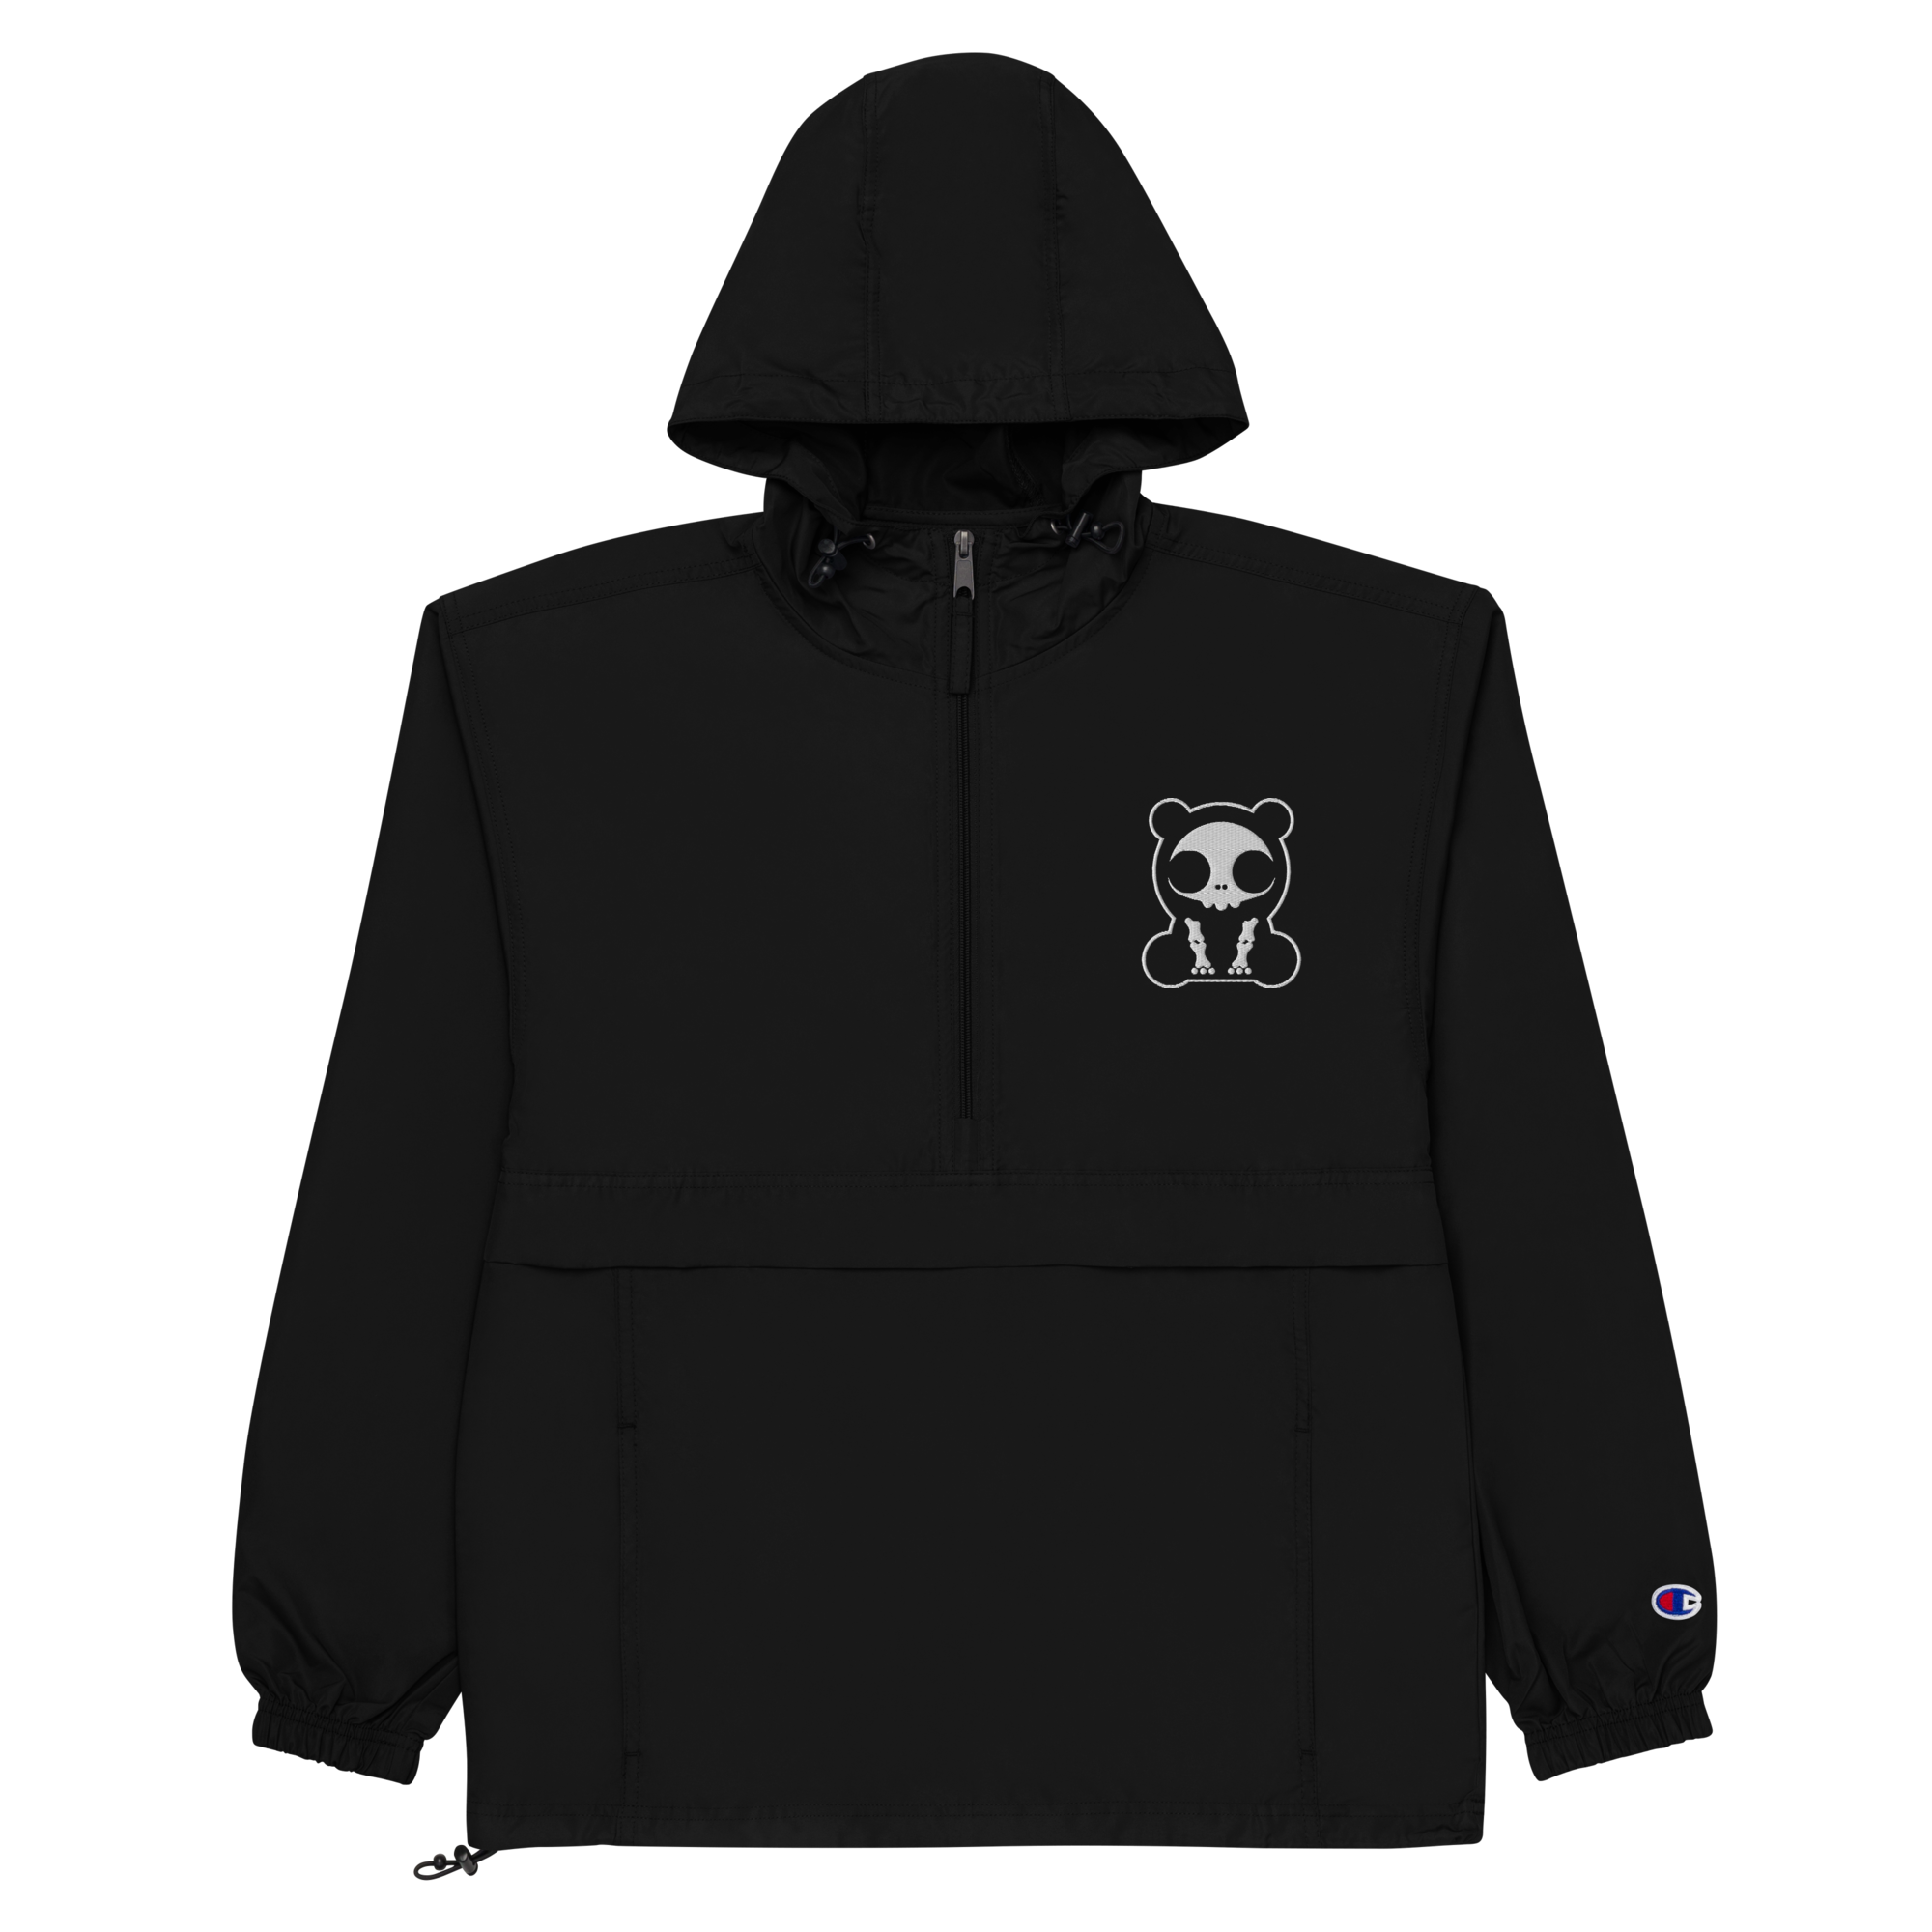 "DEATH BEAR" Embroidered Champion Packable Jacket